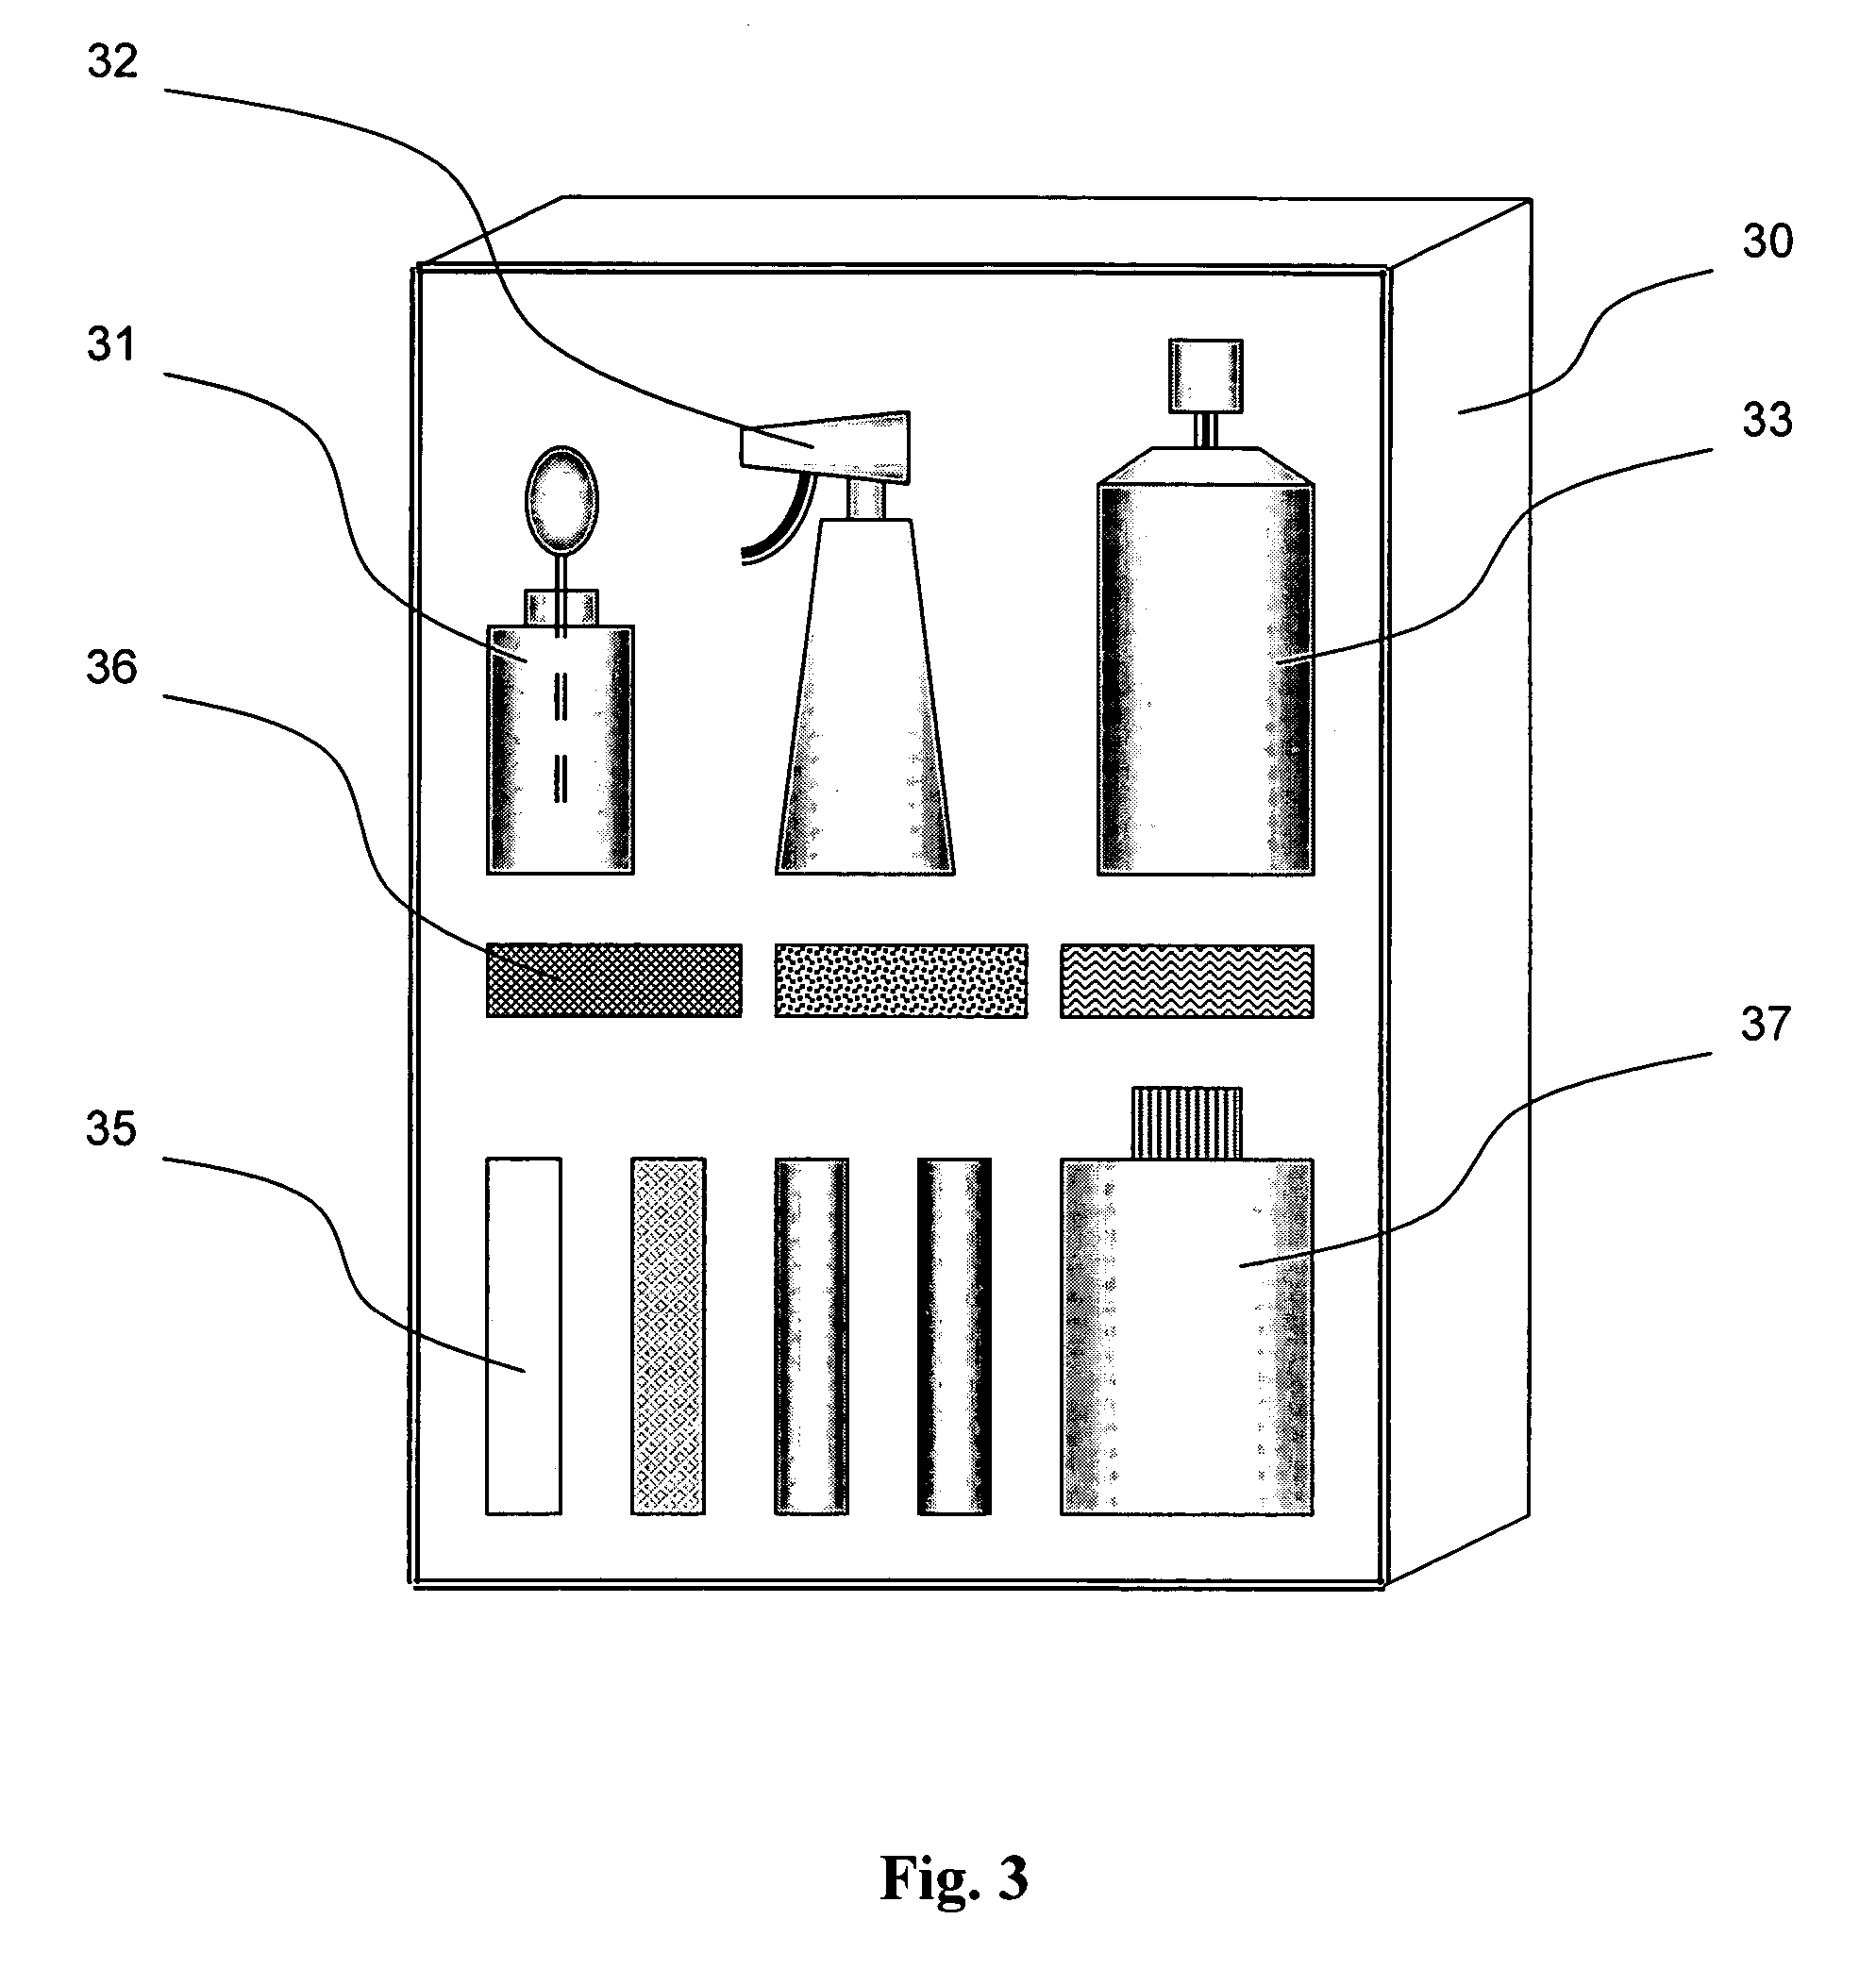 Method for masking and removing stains from rugged solid surfaces